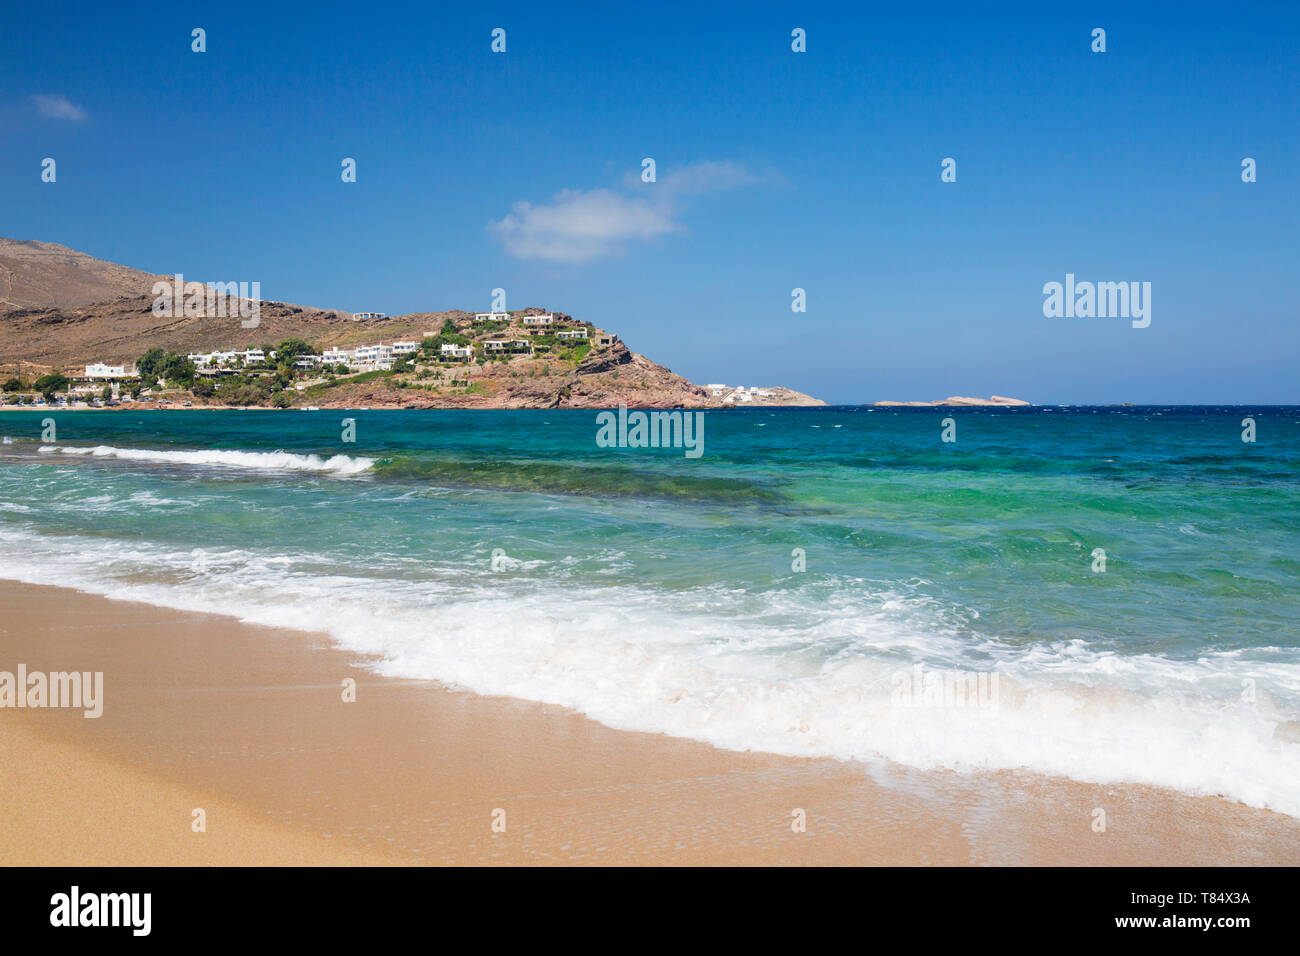 Panormos, Mykonos, South Aegean, Greece. View from sandy beach across the clear turquoise waters of Panormos Bay. Stock Photo